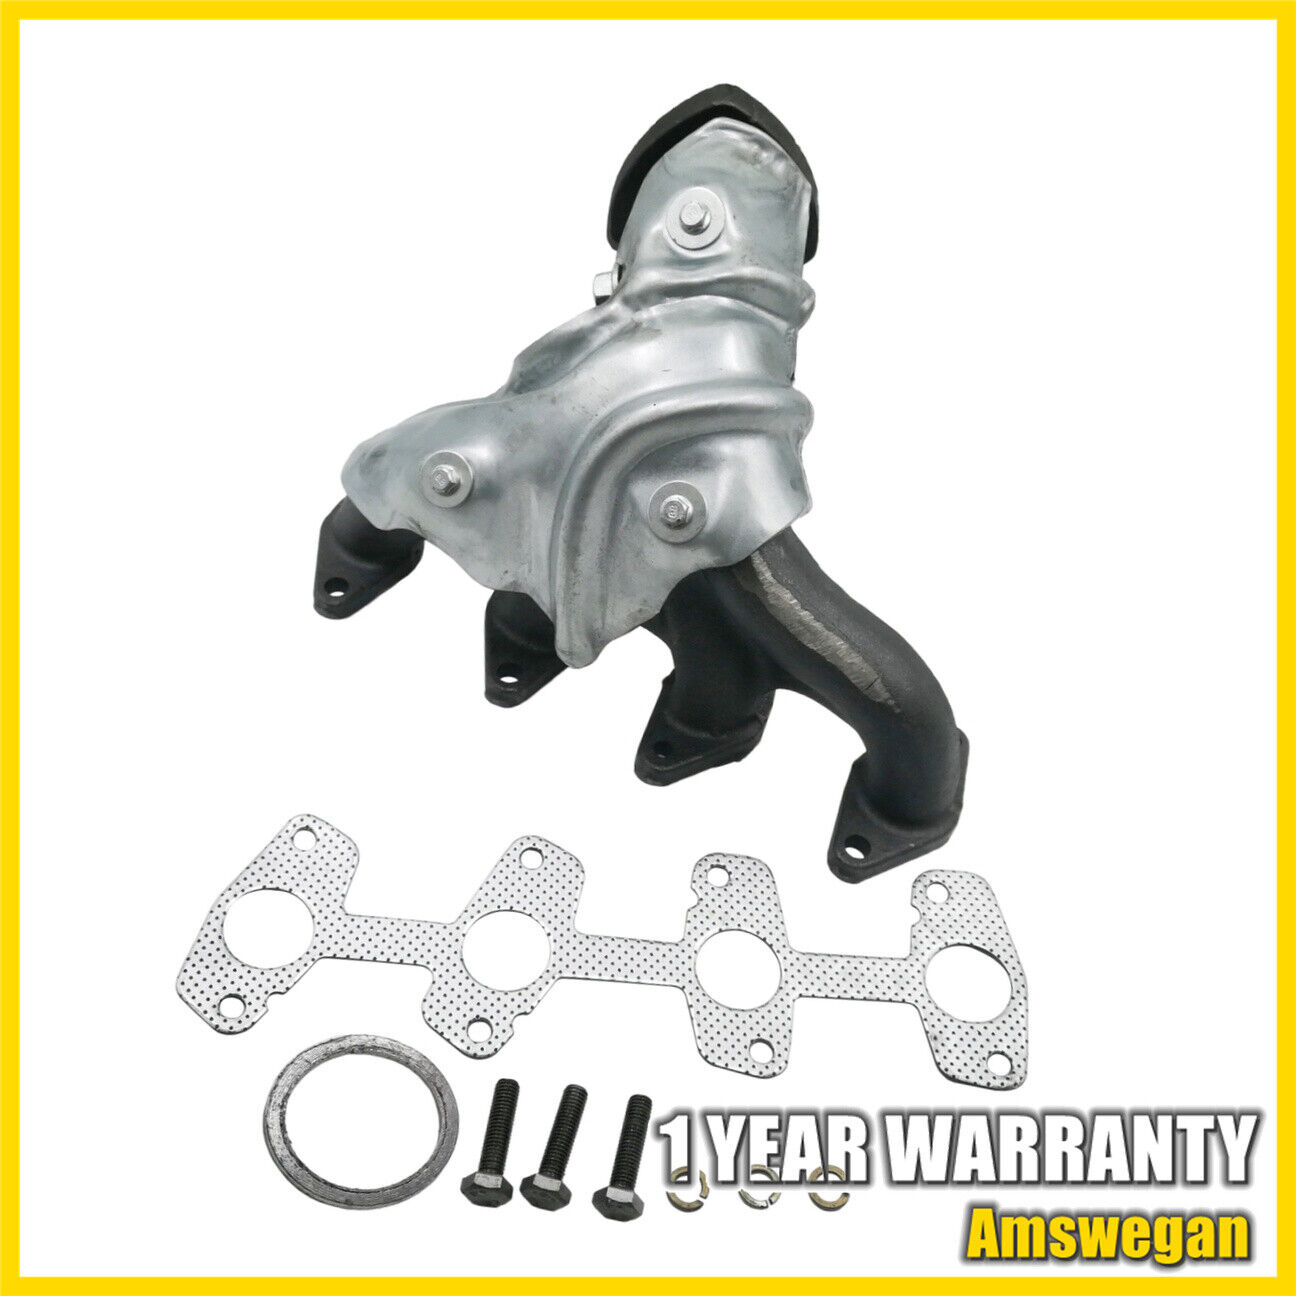 Exhaust Manifold For 1998-2000, 2003 Chevrolet S10 GMC Sonoma Pickup L4 2.2L OHV